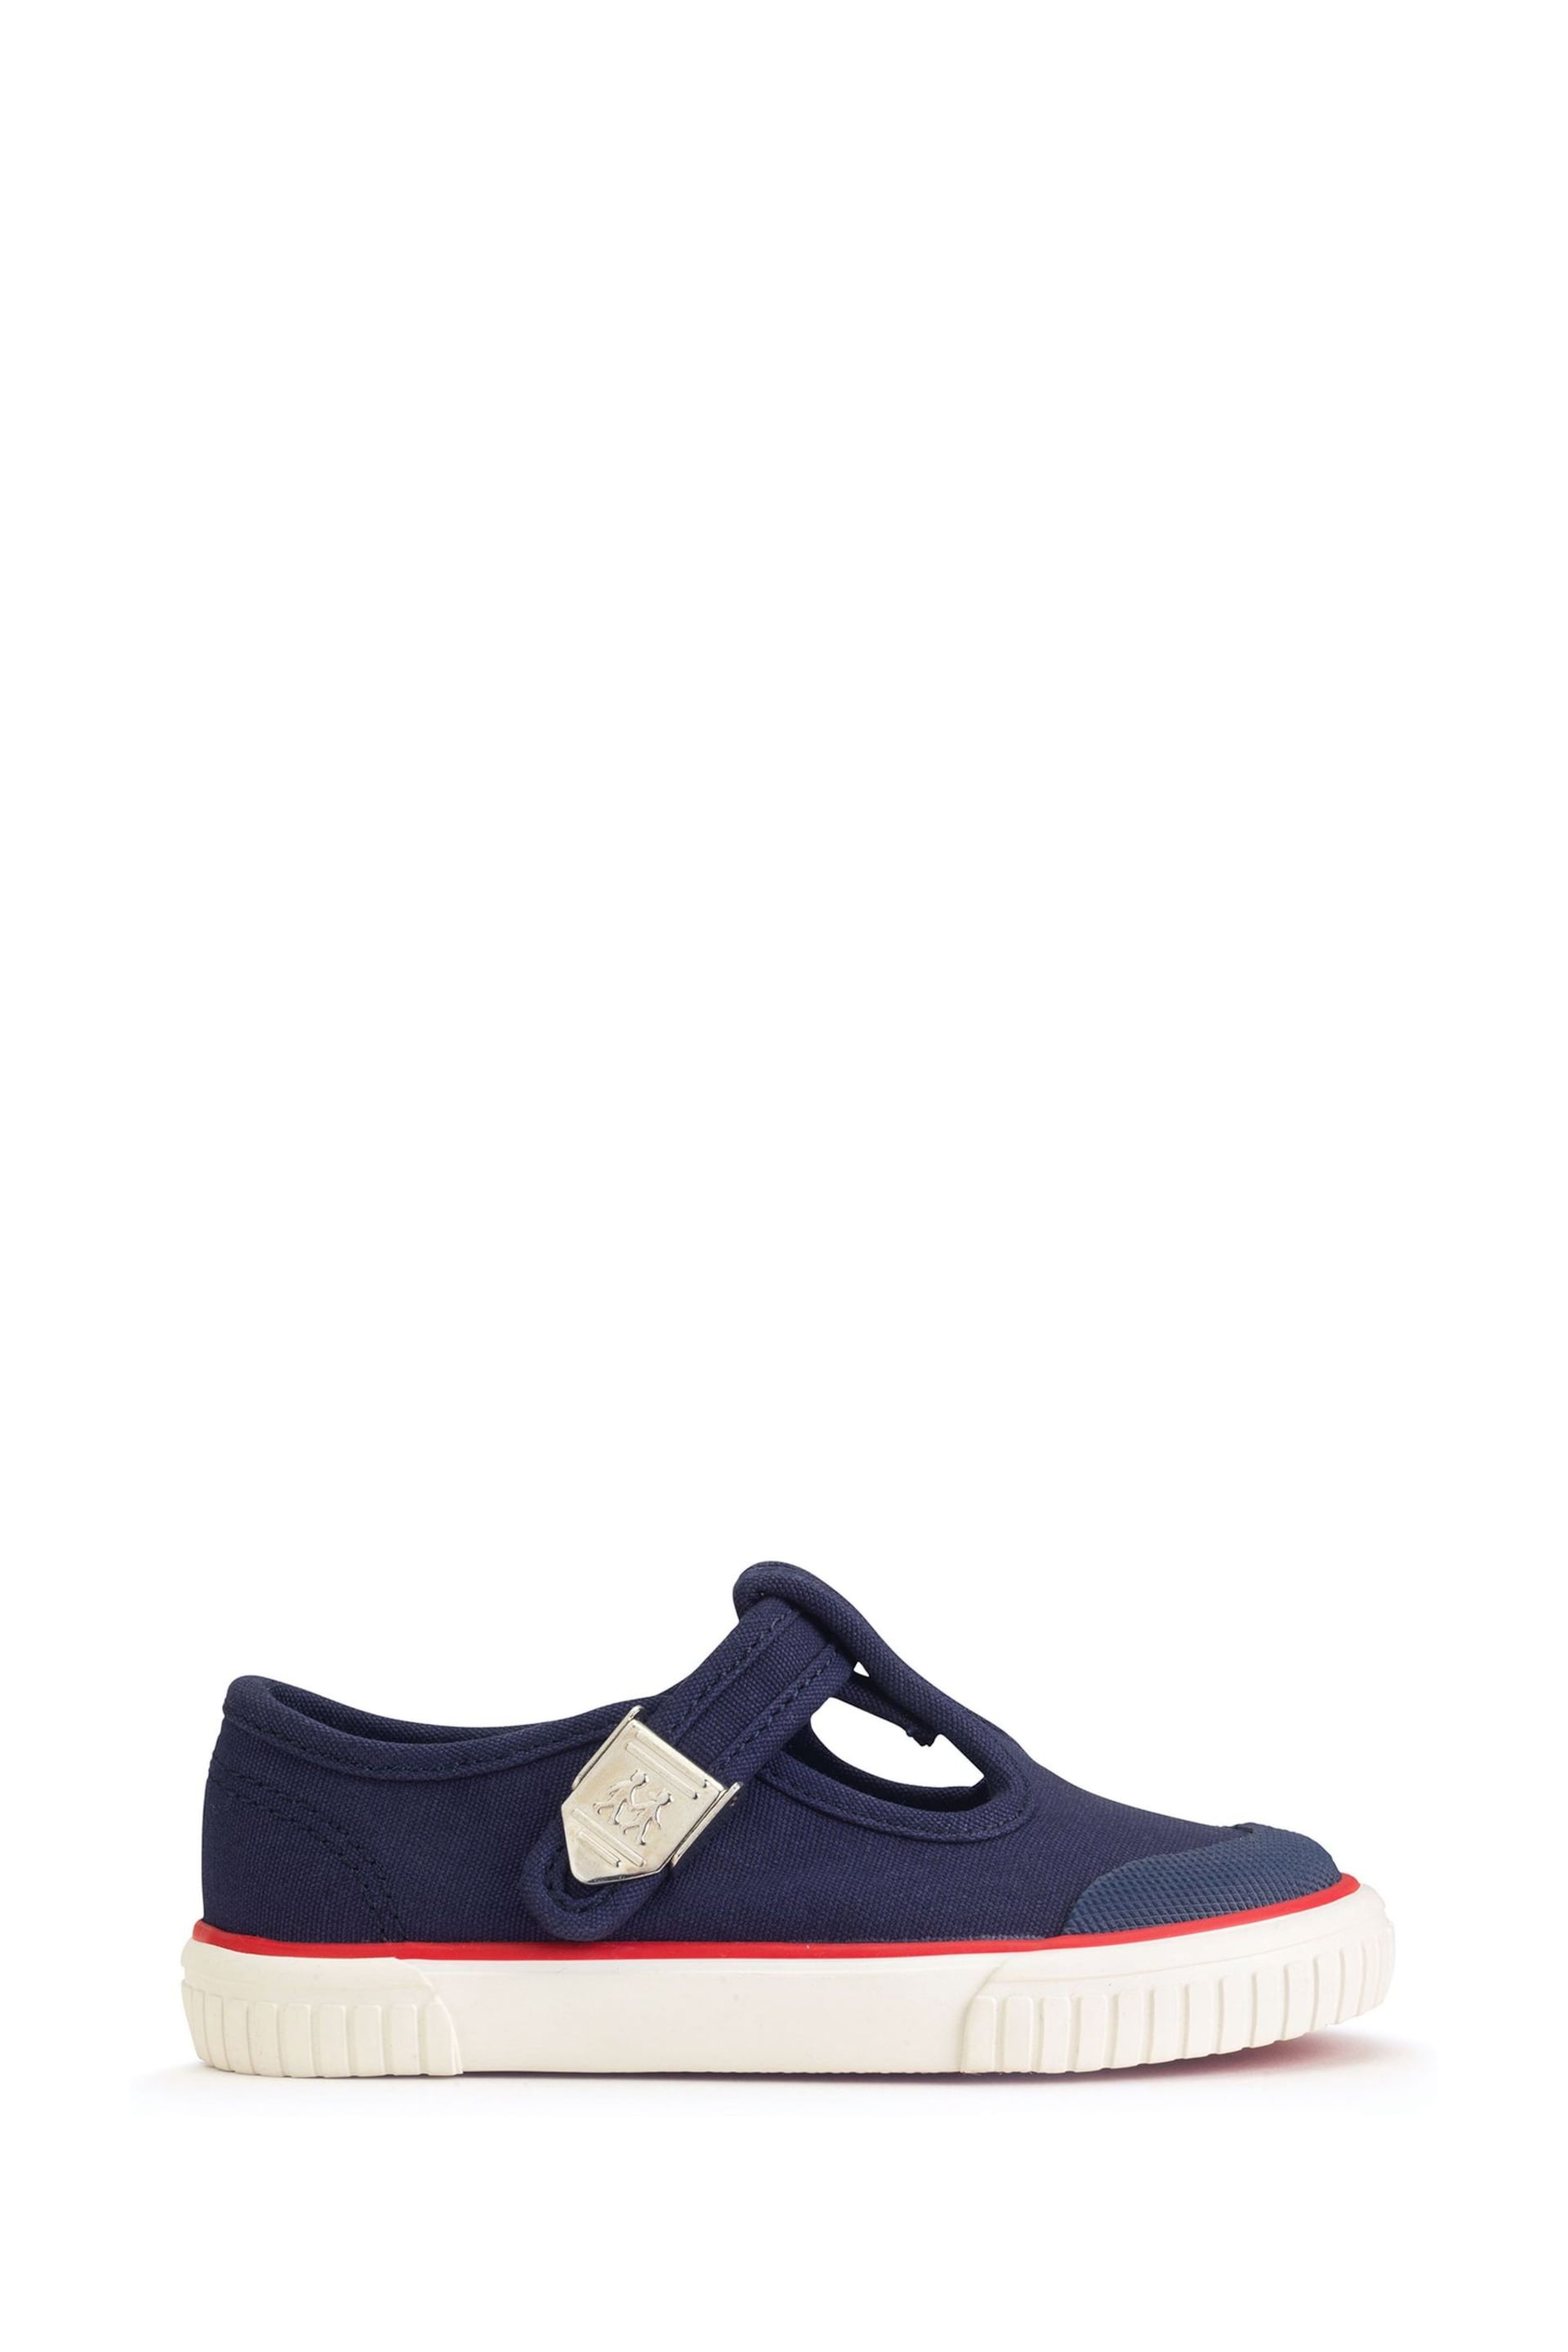 Start Rite Blue Anchor Washable Canvas T-Bar Summer Shoes - Image 1 of 6